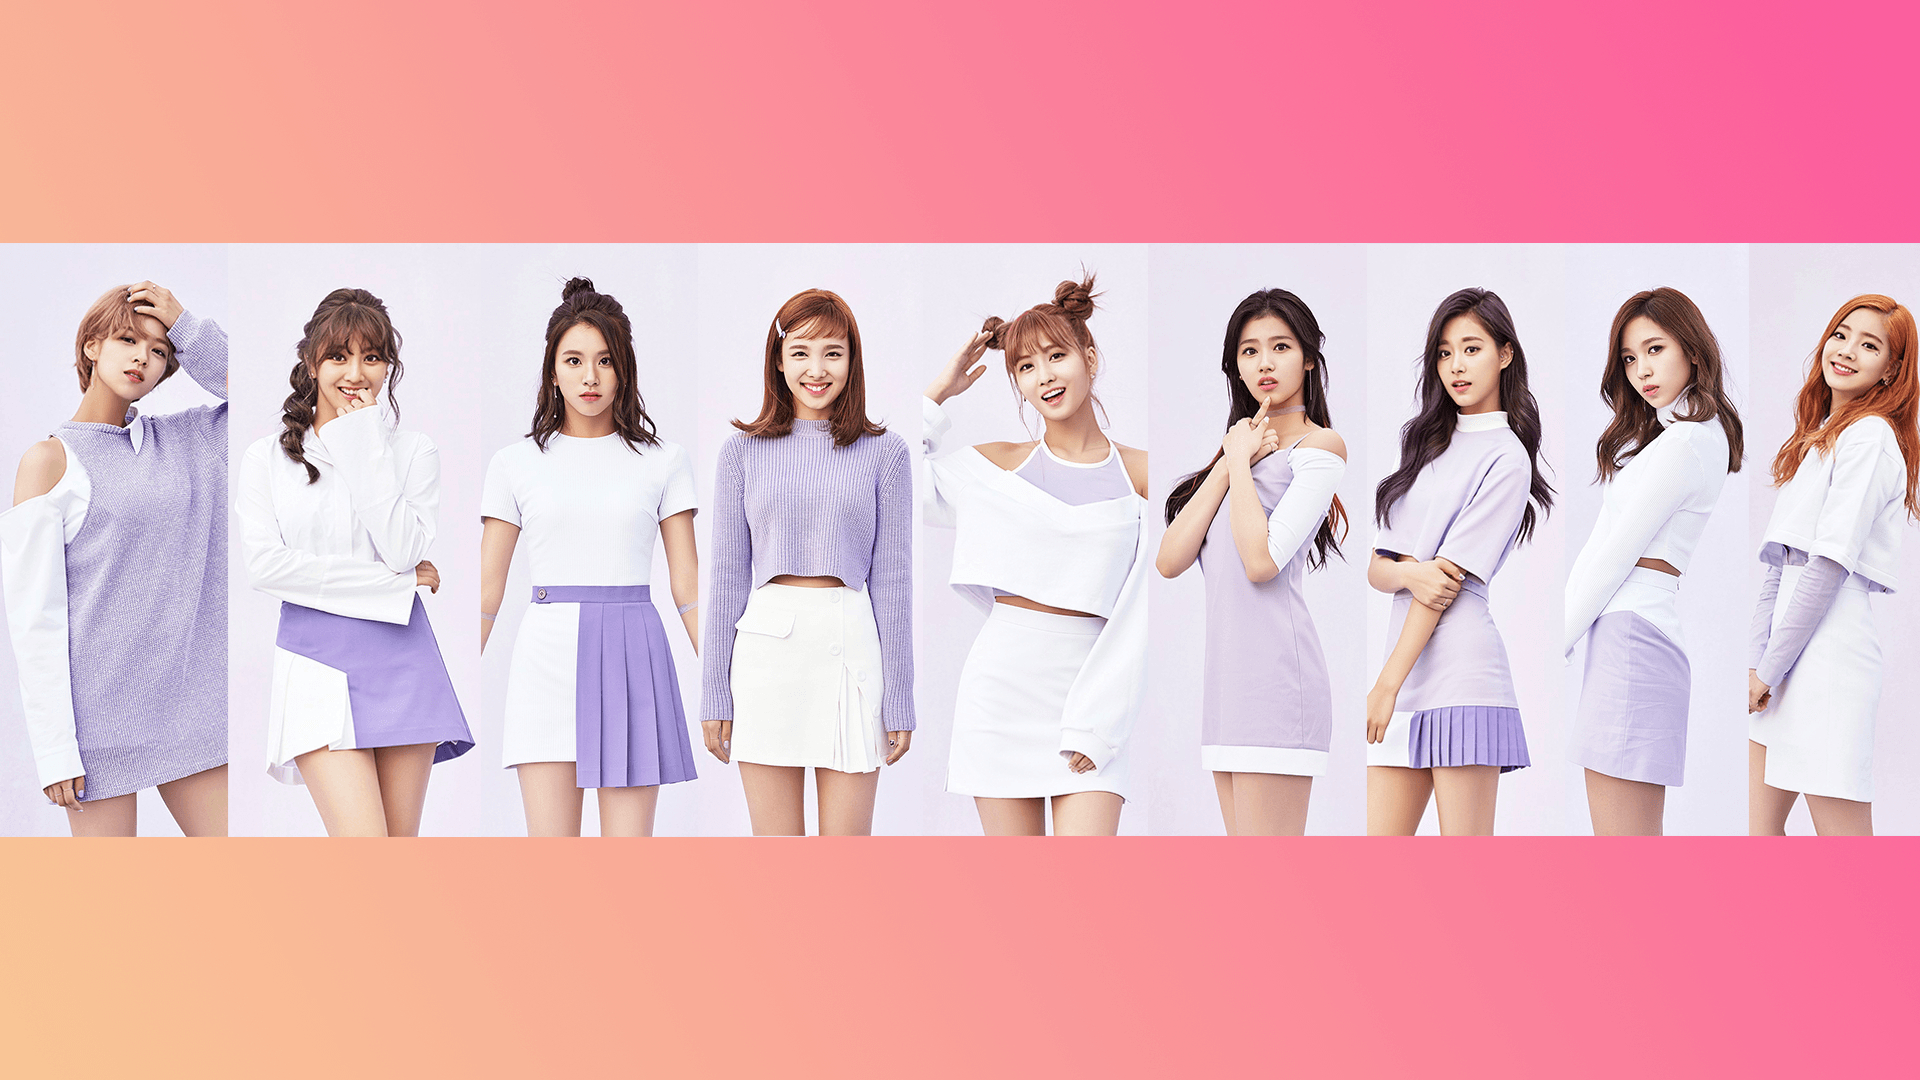 1920x1080 Twice Laptop Wallpapers Top Free Twice Laptop Backgrounds